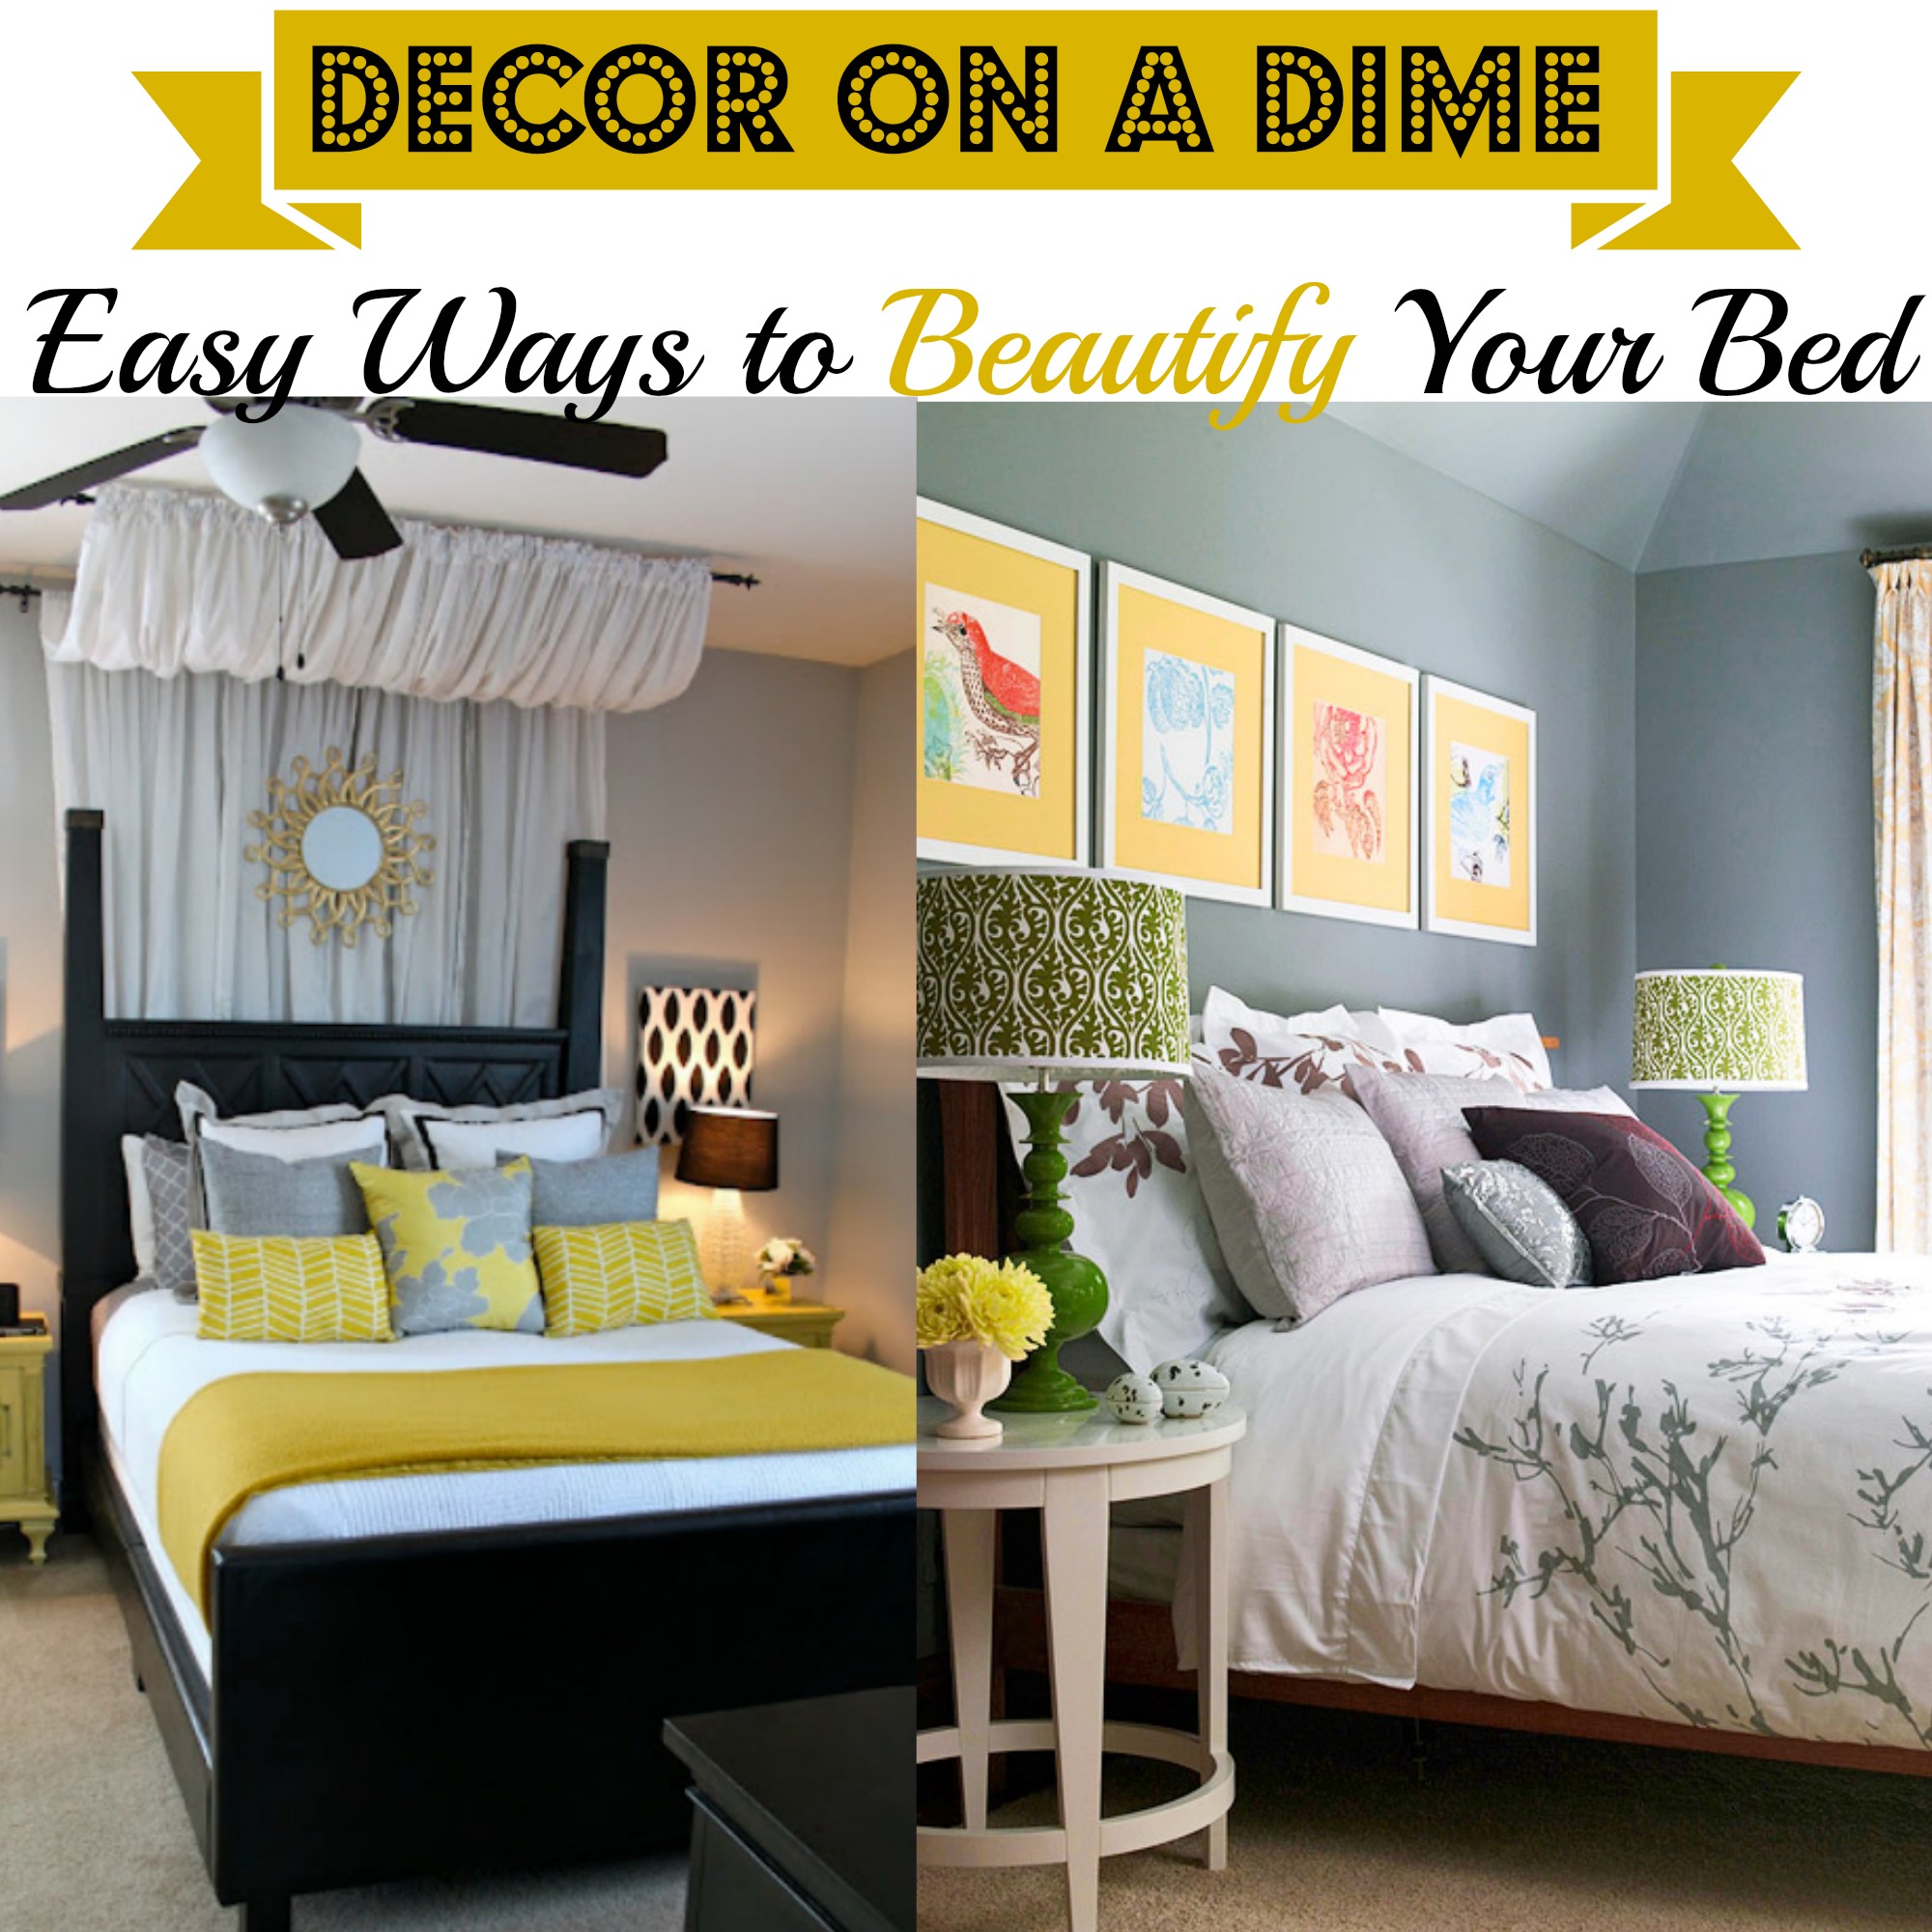 Decor on a Dime Steps to Create a Zen Bedroom Looking